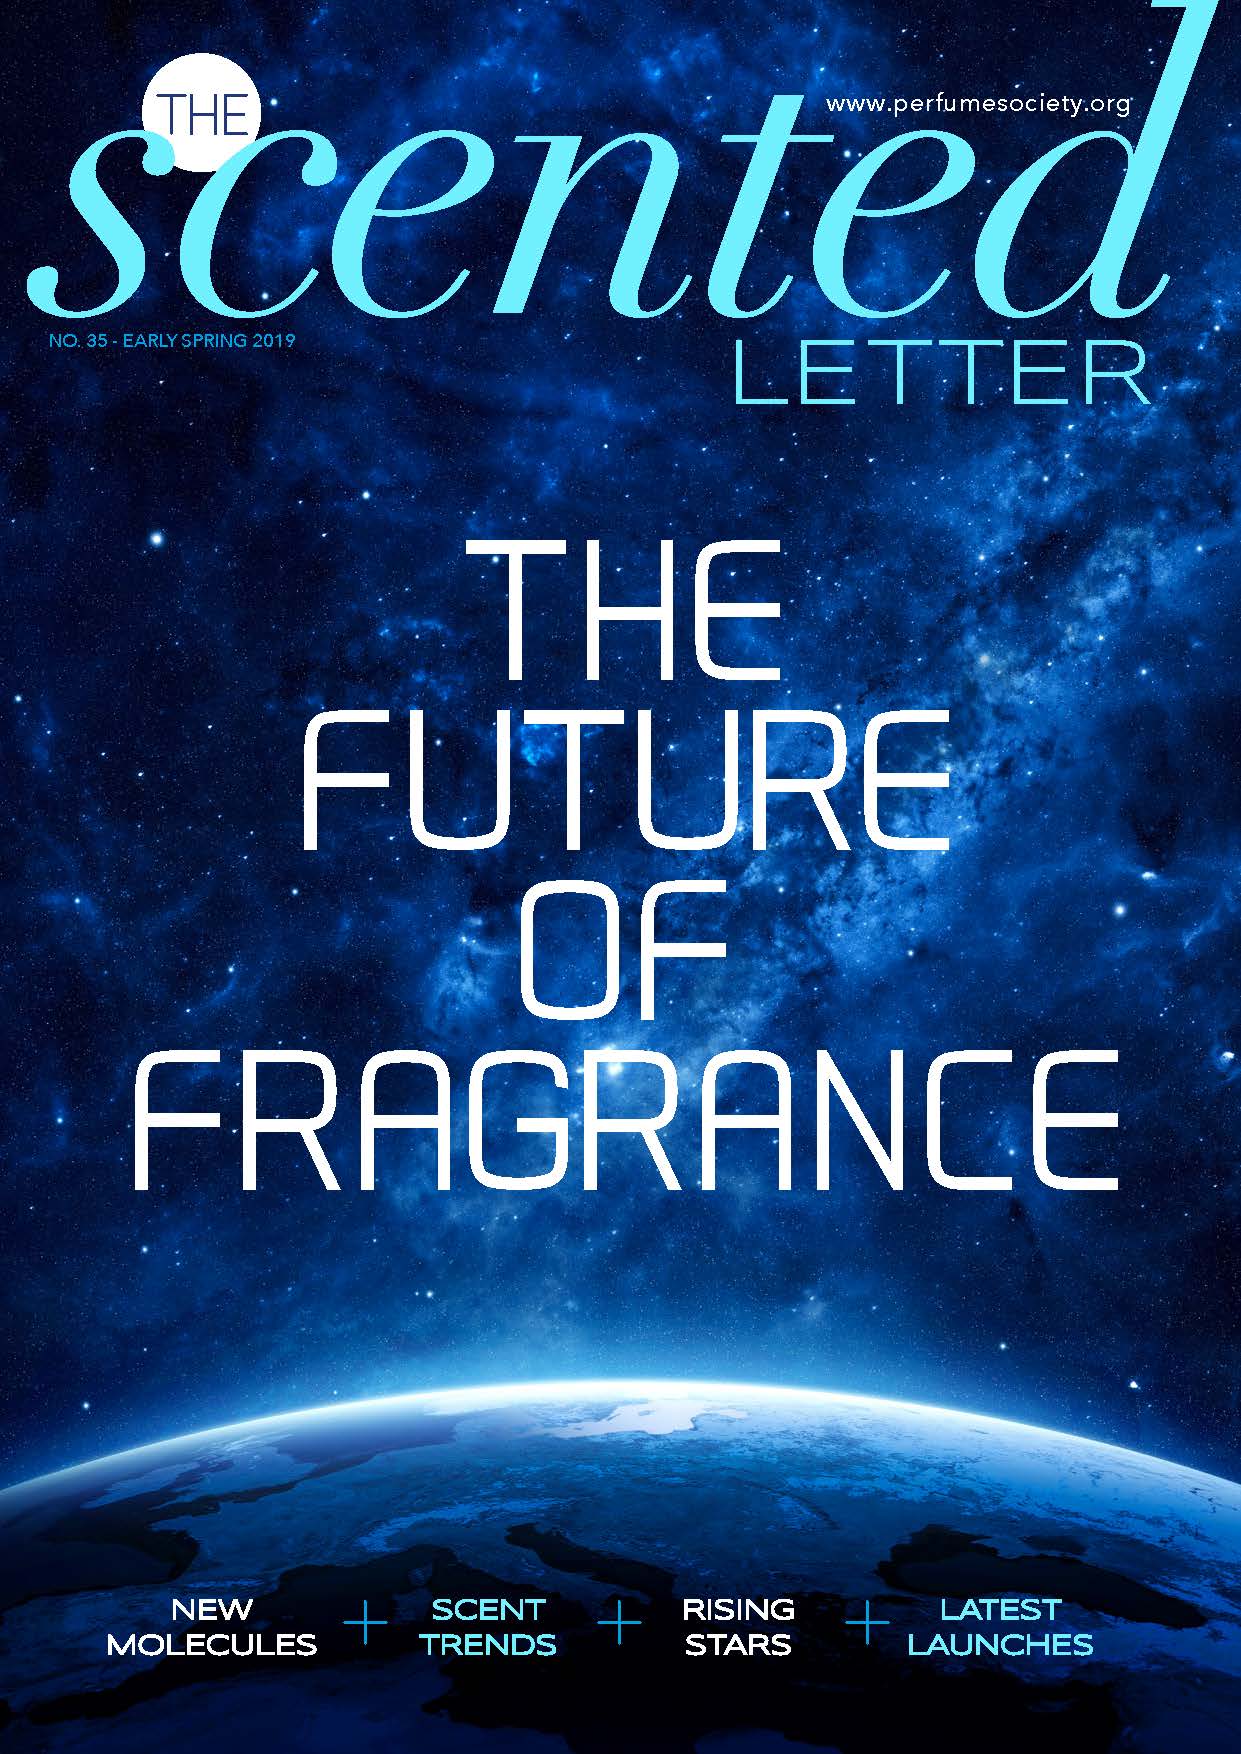 a-scented-letter-the-future-of-fragrance-whats-in-the-bottle-hero-image